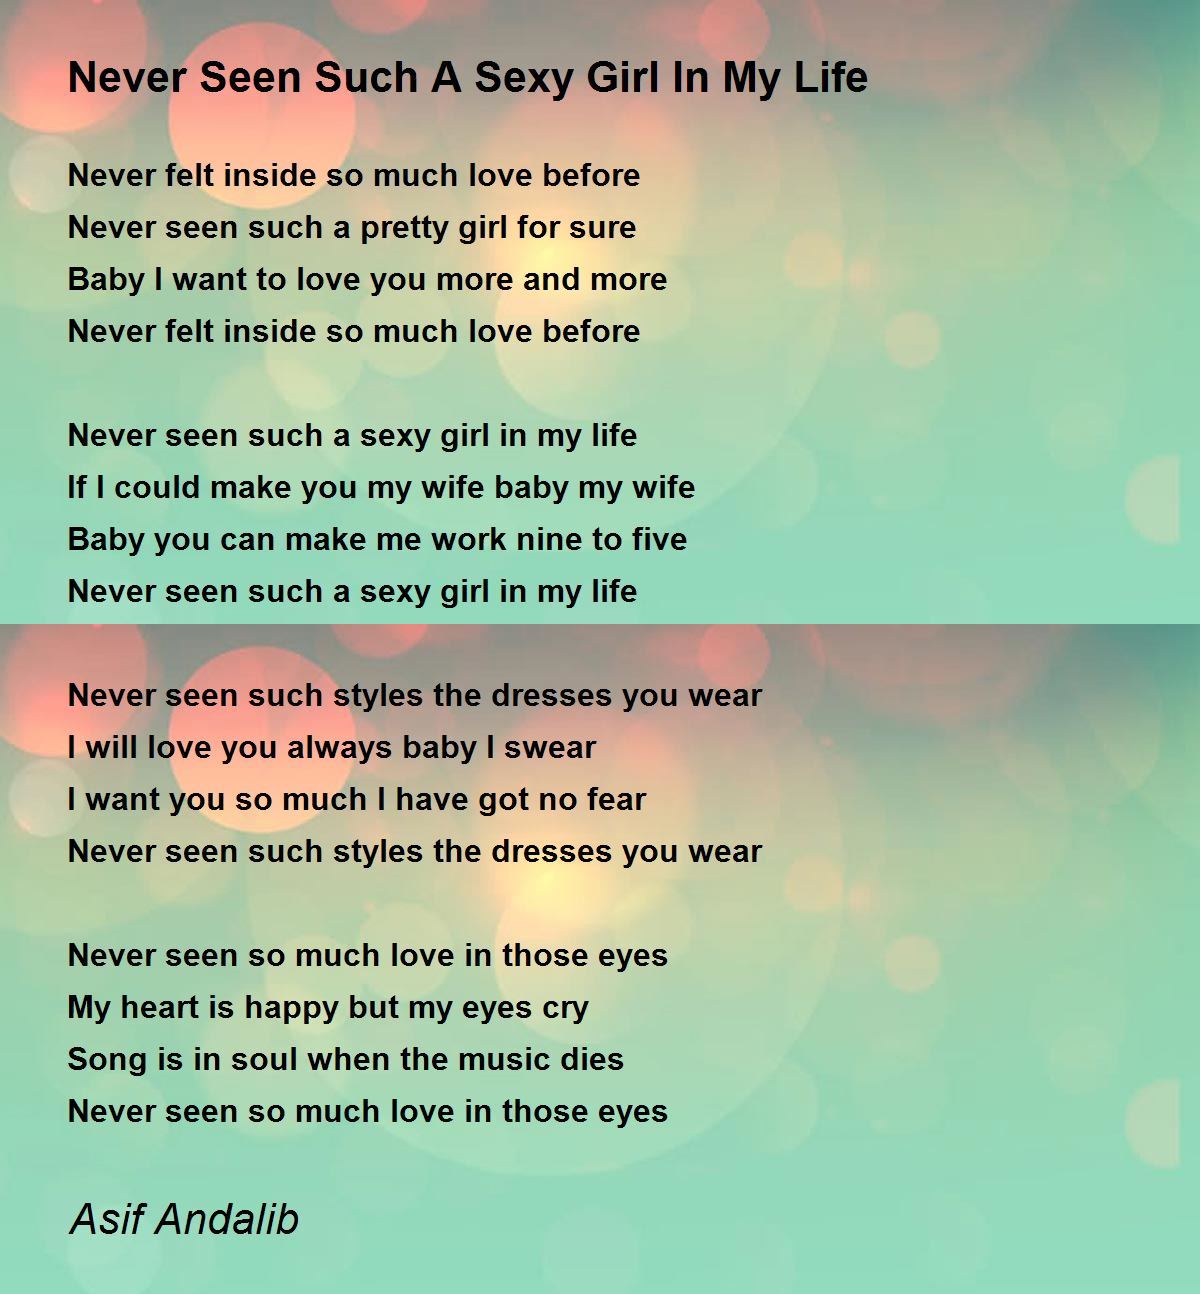 Never Seen Such A Sexy Girl In My Life poem is from Asif Andalib poems. 